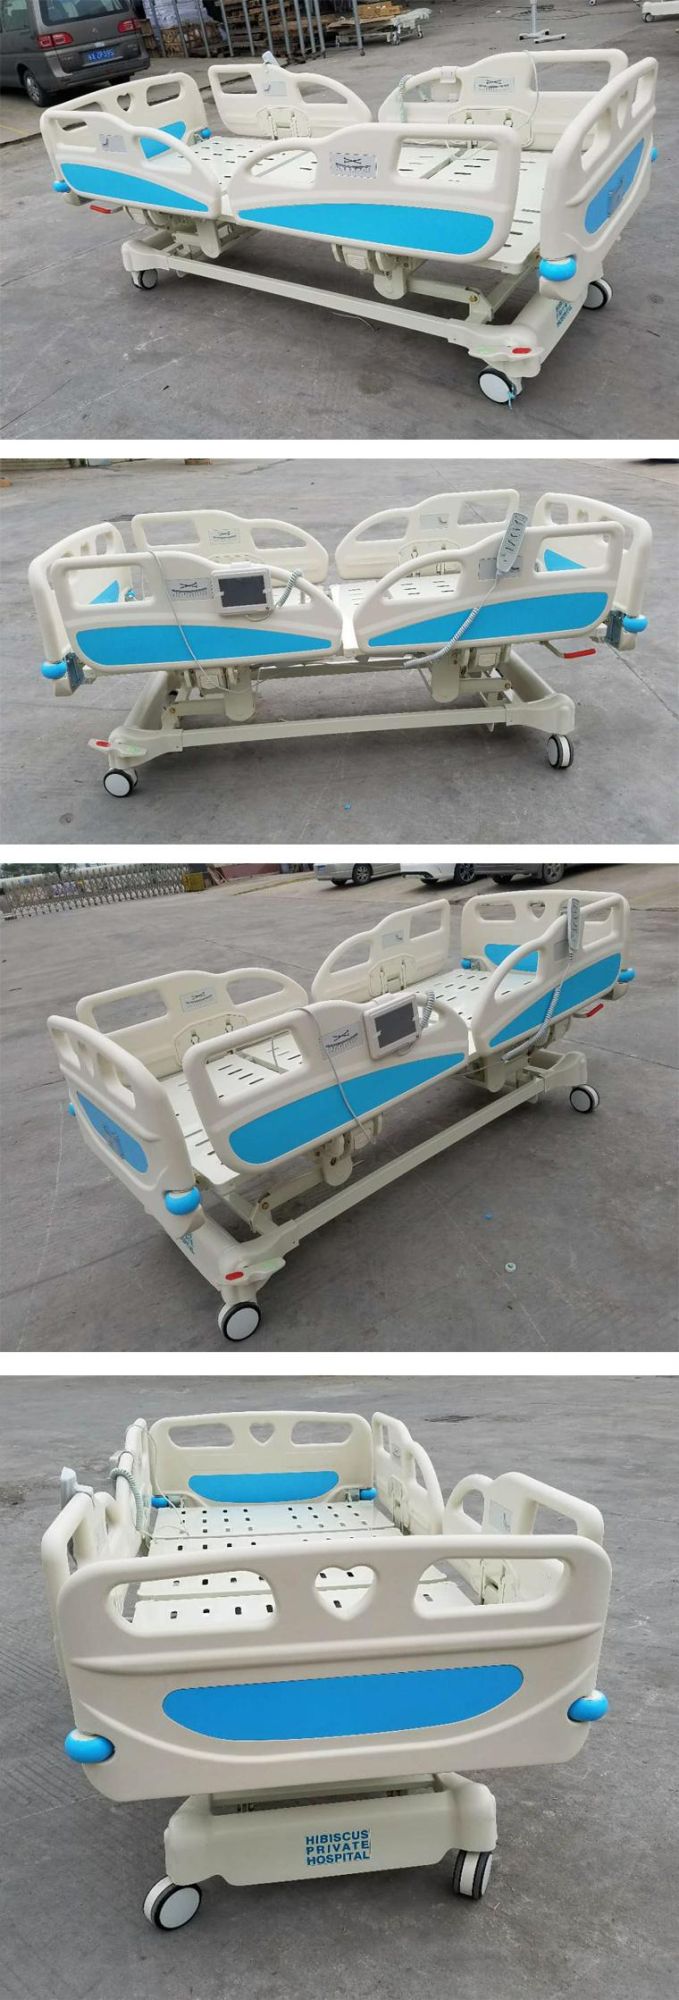 Top Sell Electric Adjustable 5-Function Hospital ICU Bed Price